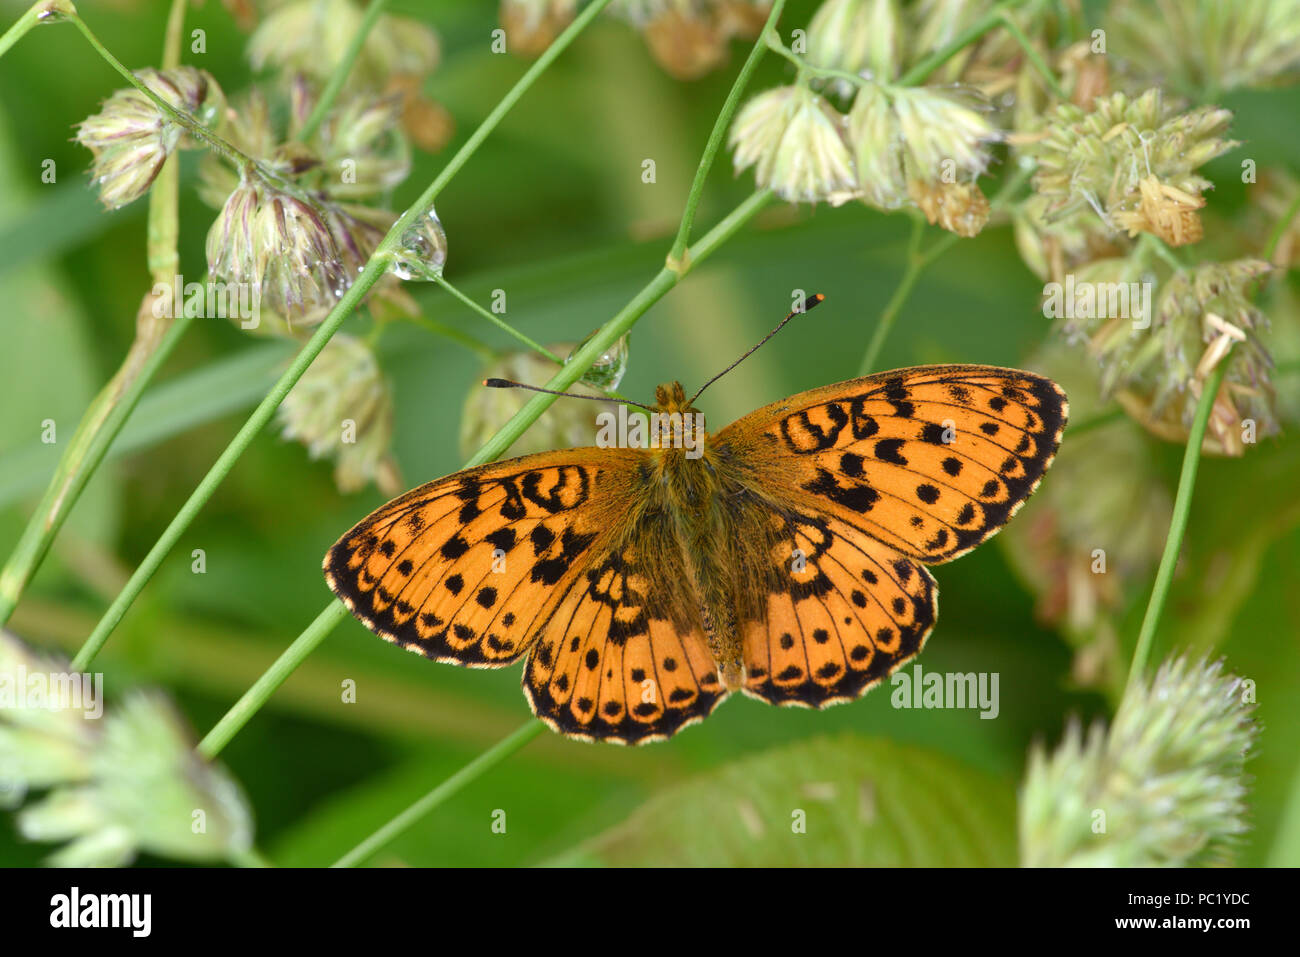 Lesser Marbled Fritillary Butterfly (Brenthis ino) adult at rest on flowers, Estonia, July Stock Photo